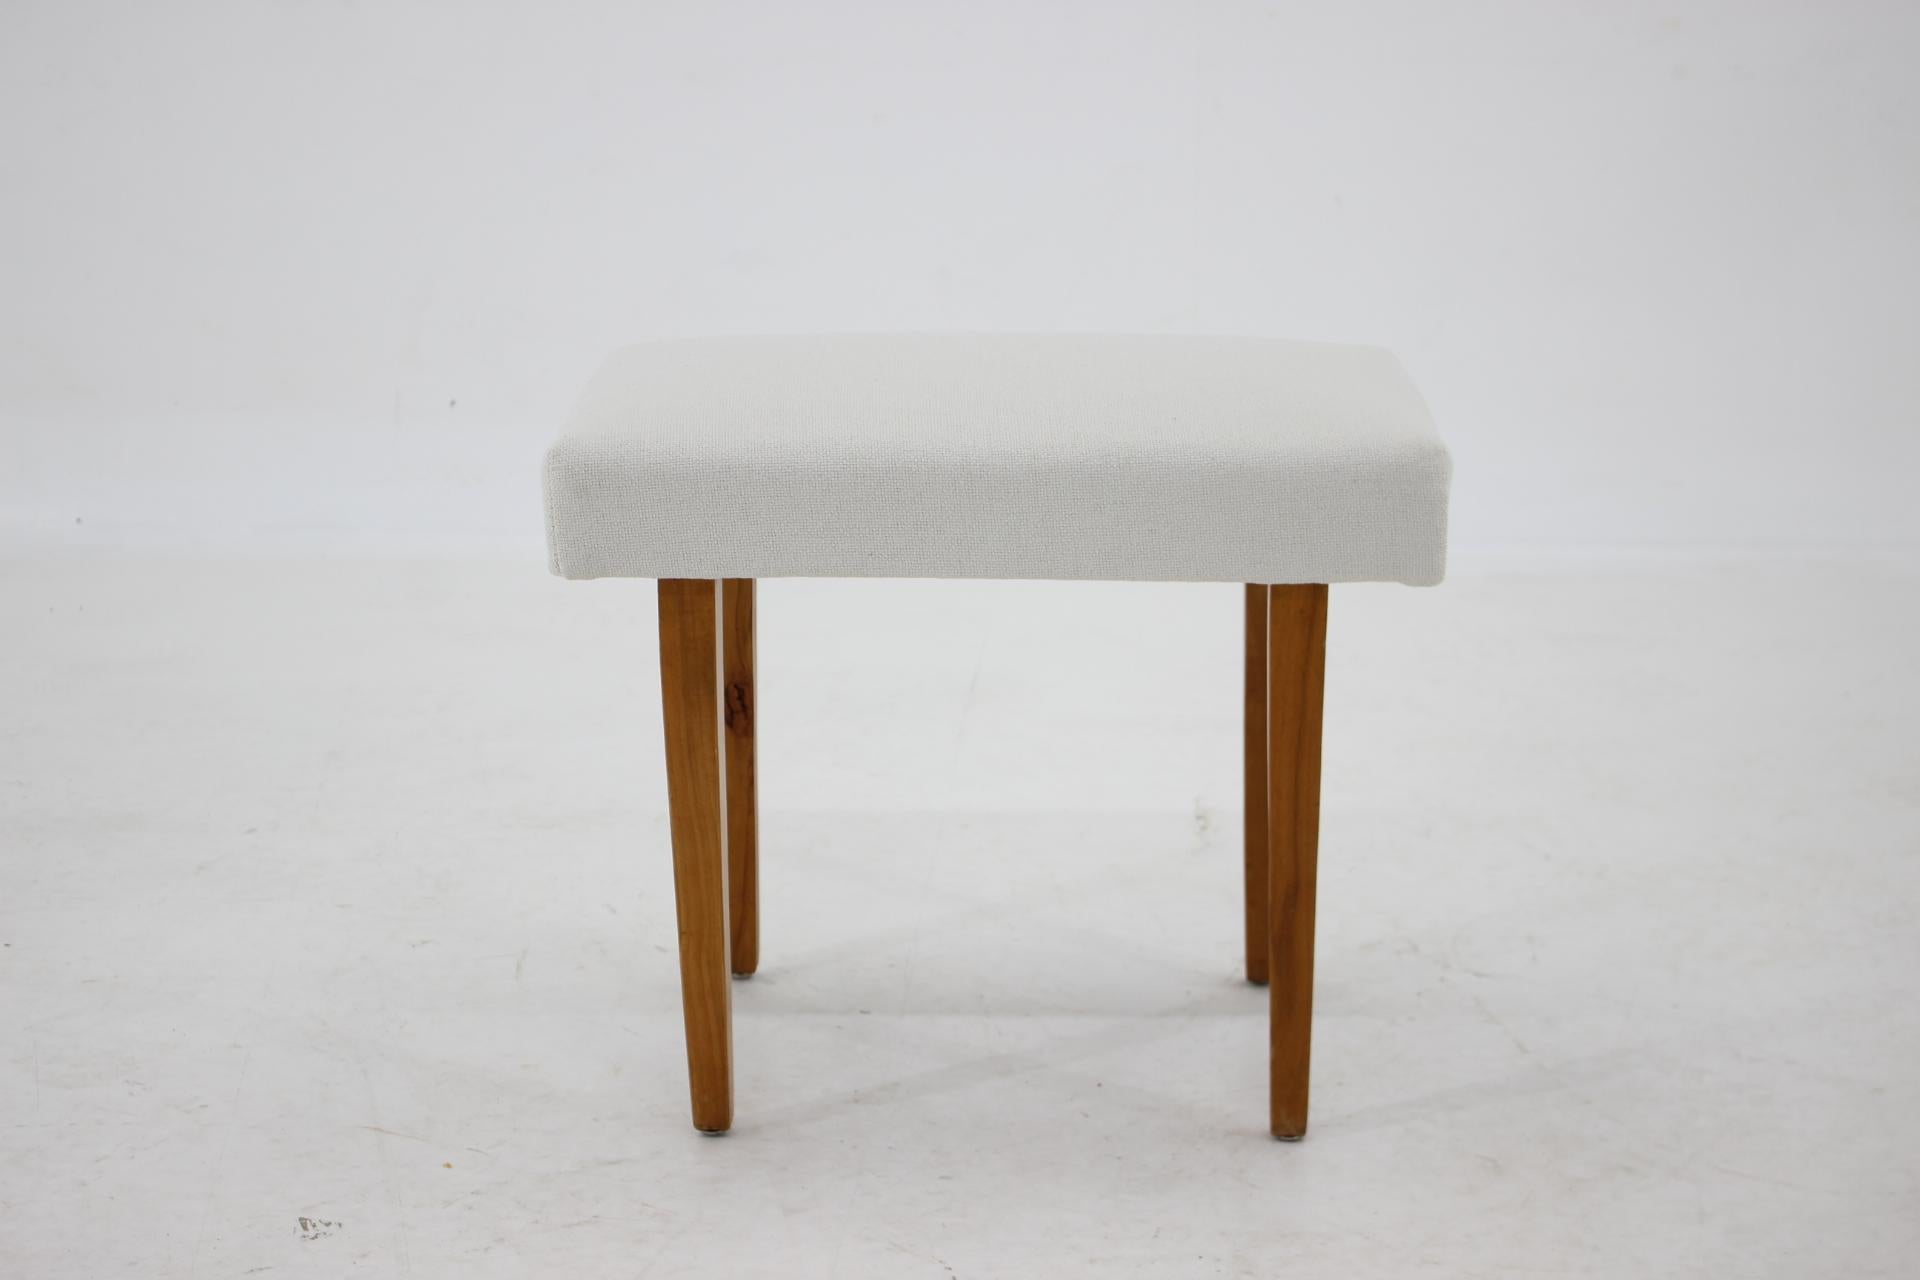 - Newly upholstered
- wooden parts has been refurbished.